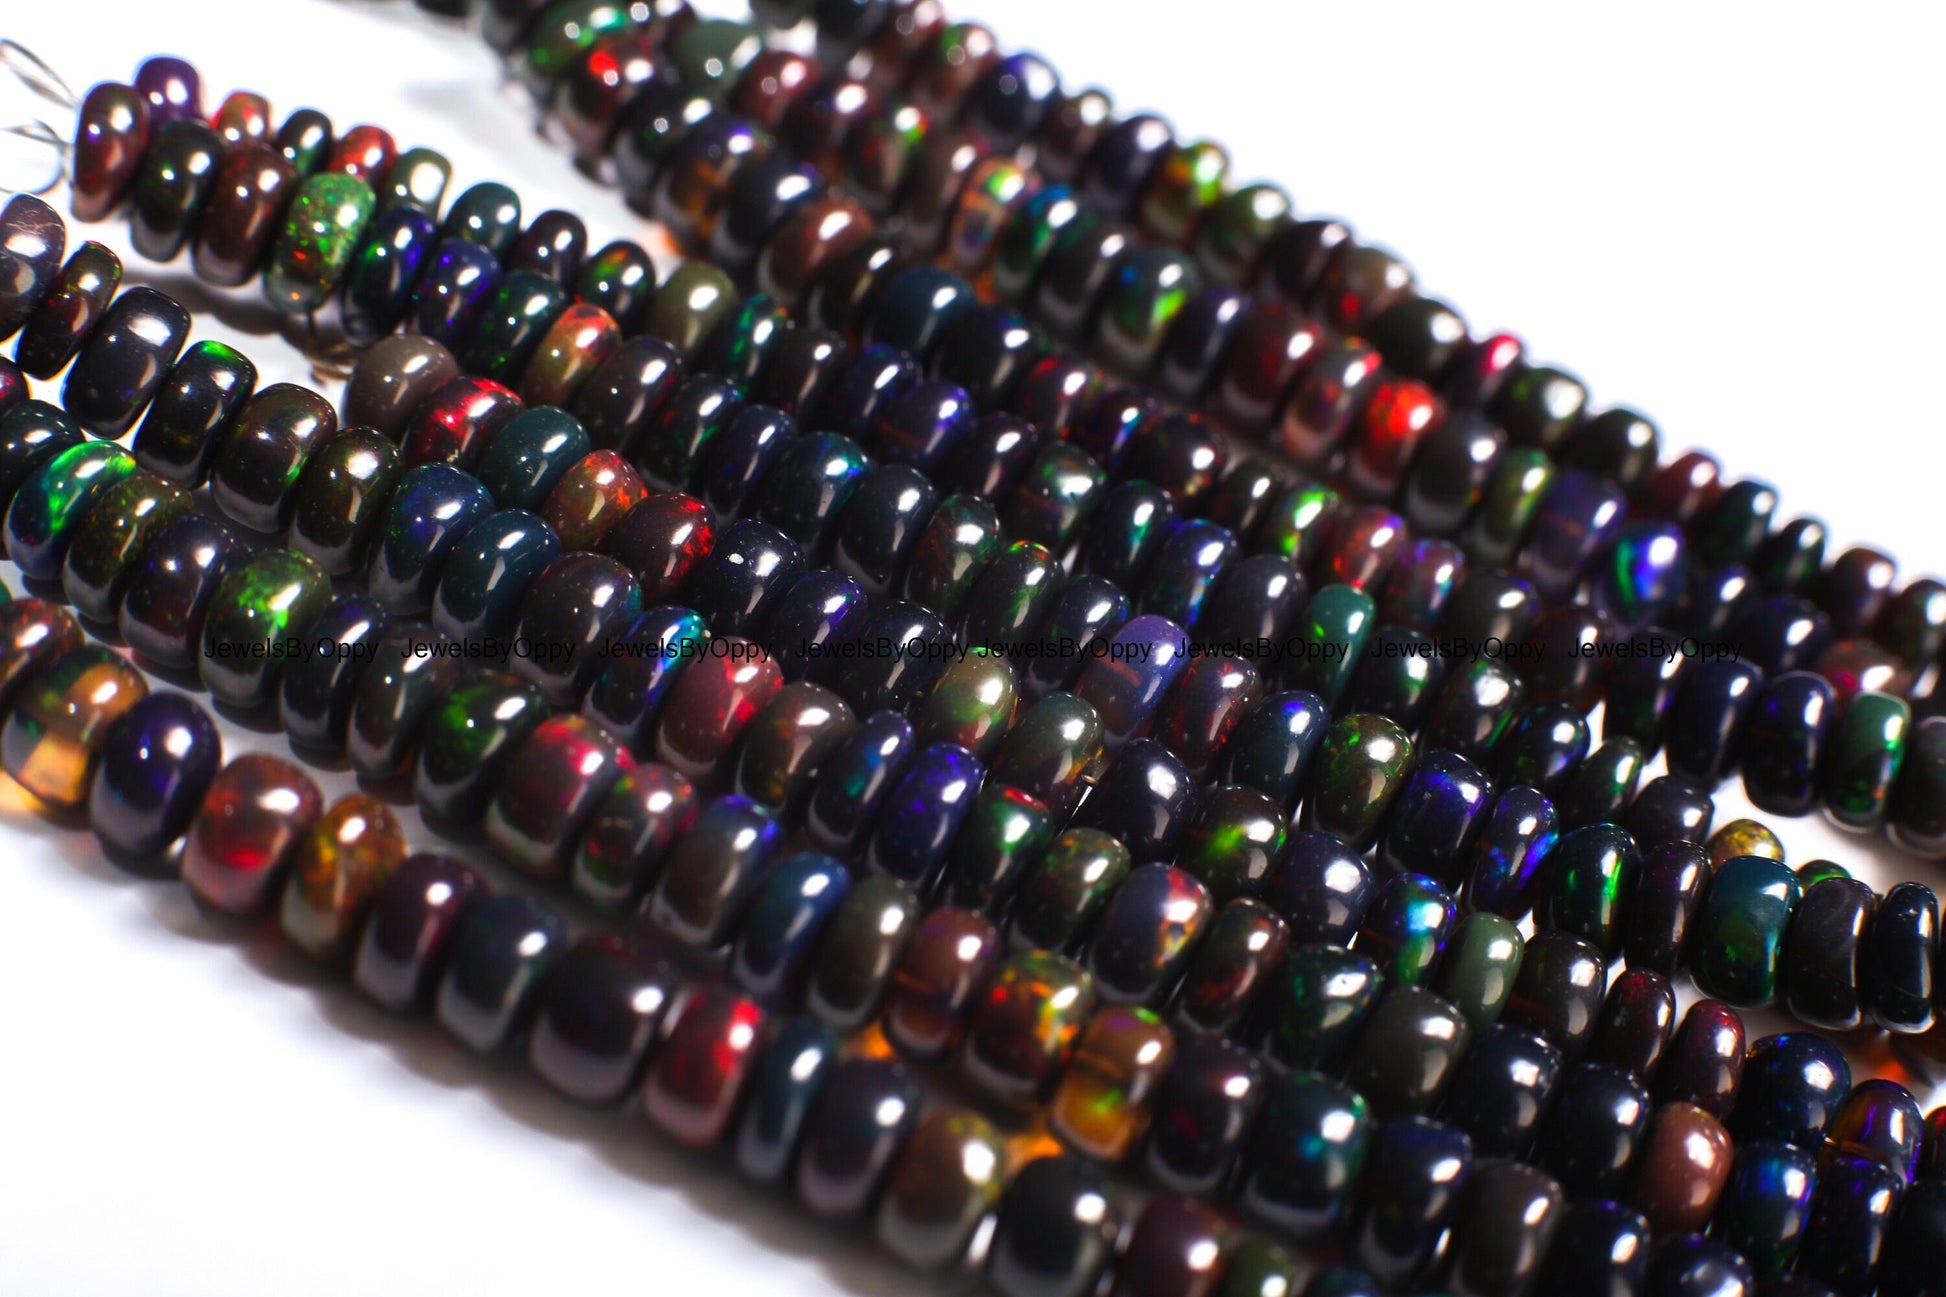 Black Ethiopian Opal Smooth Rondelle 4.5-5mm, Jewelry Making Bracelet, Necklace, Natural, High Quality Gemstone Beads 3&quot;, 7&quot;, 15&quot; strand